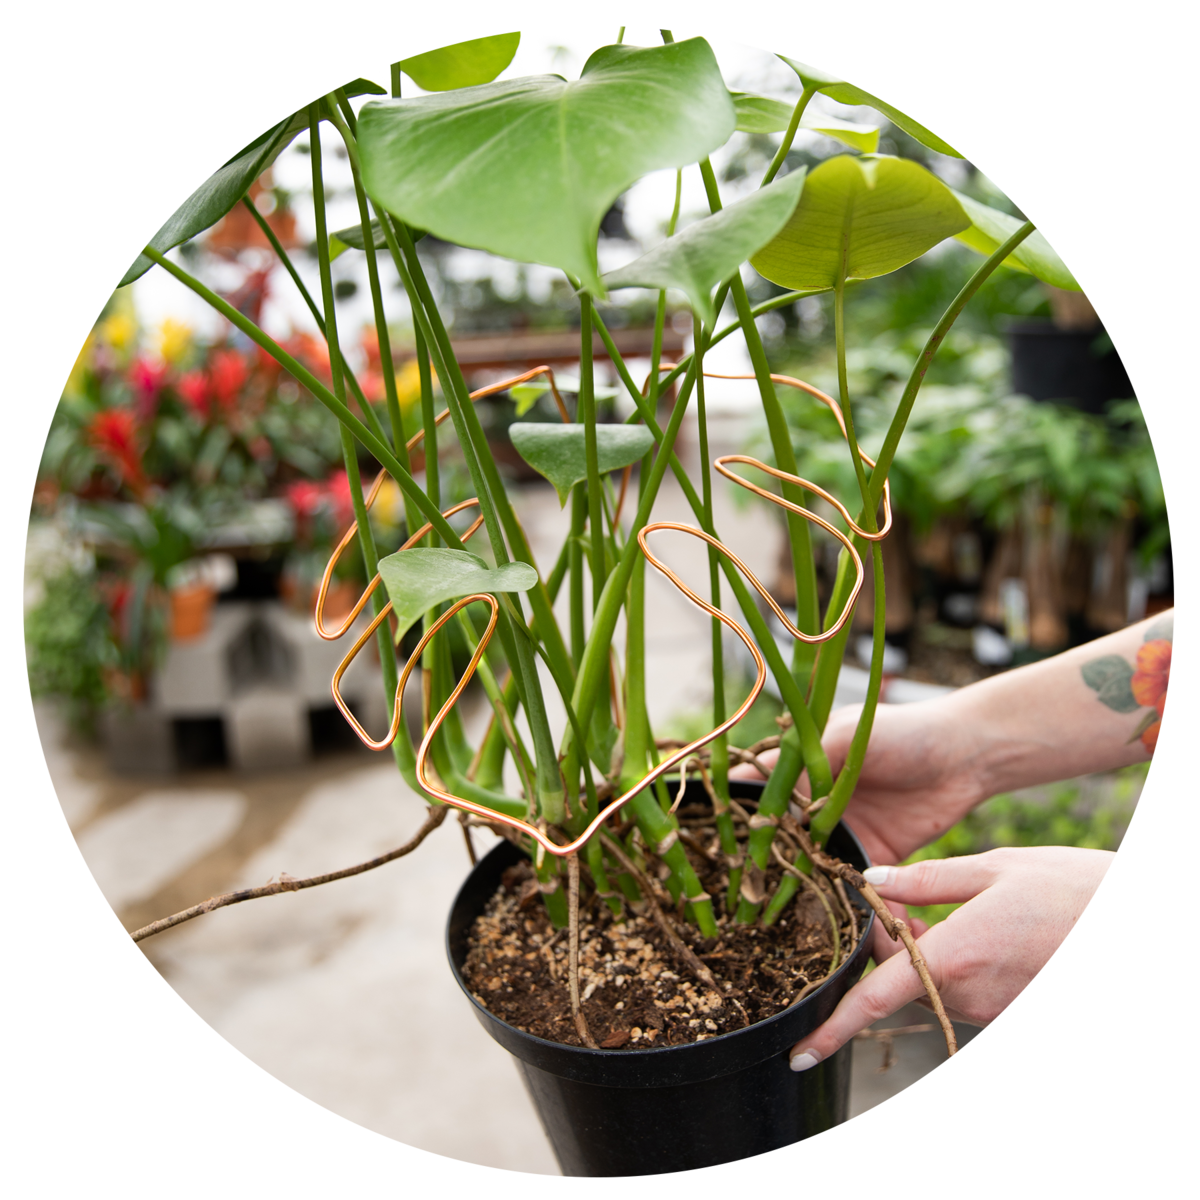 Monstera being supported by copper wire plant support